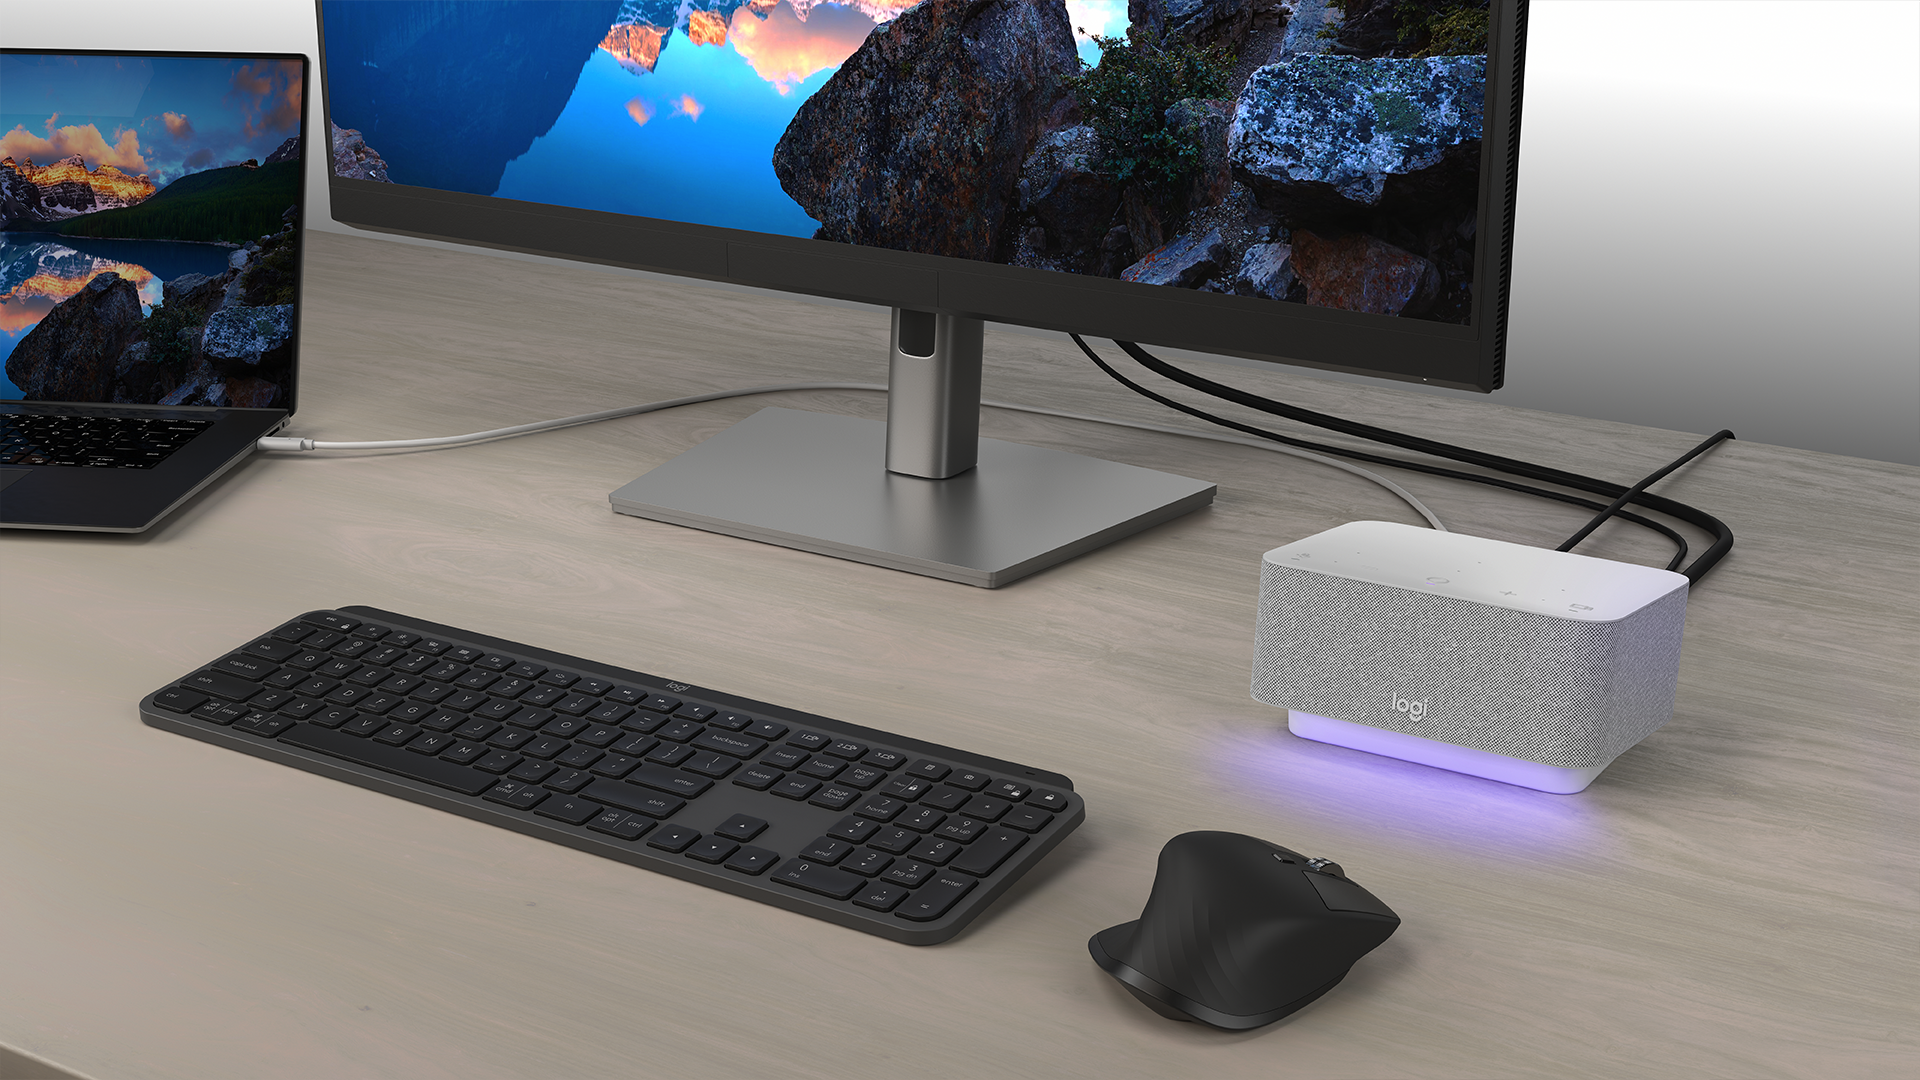 Logitech Combines a USB Dock and Speakerphone for Easier Video Calls